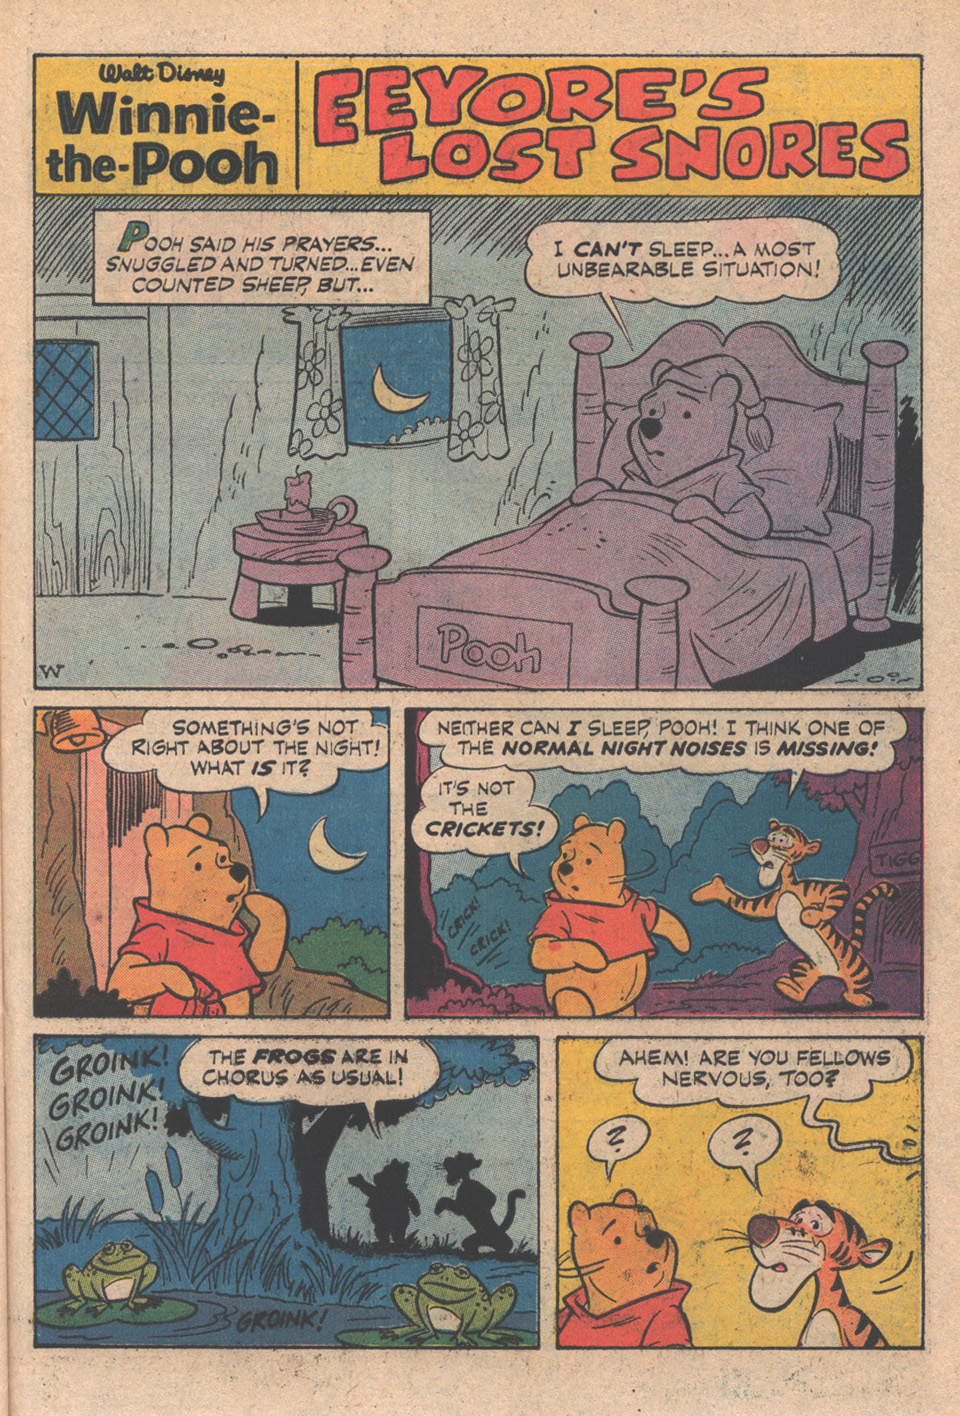 Read online Winnie-the-Pooh comic -  Issue #2 - 27